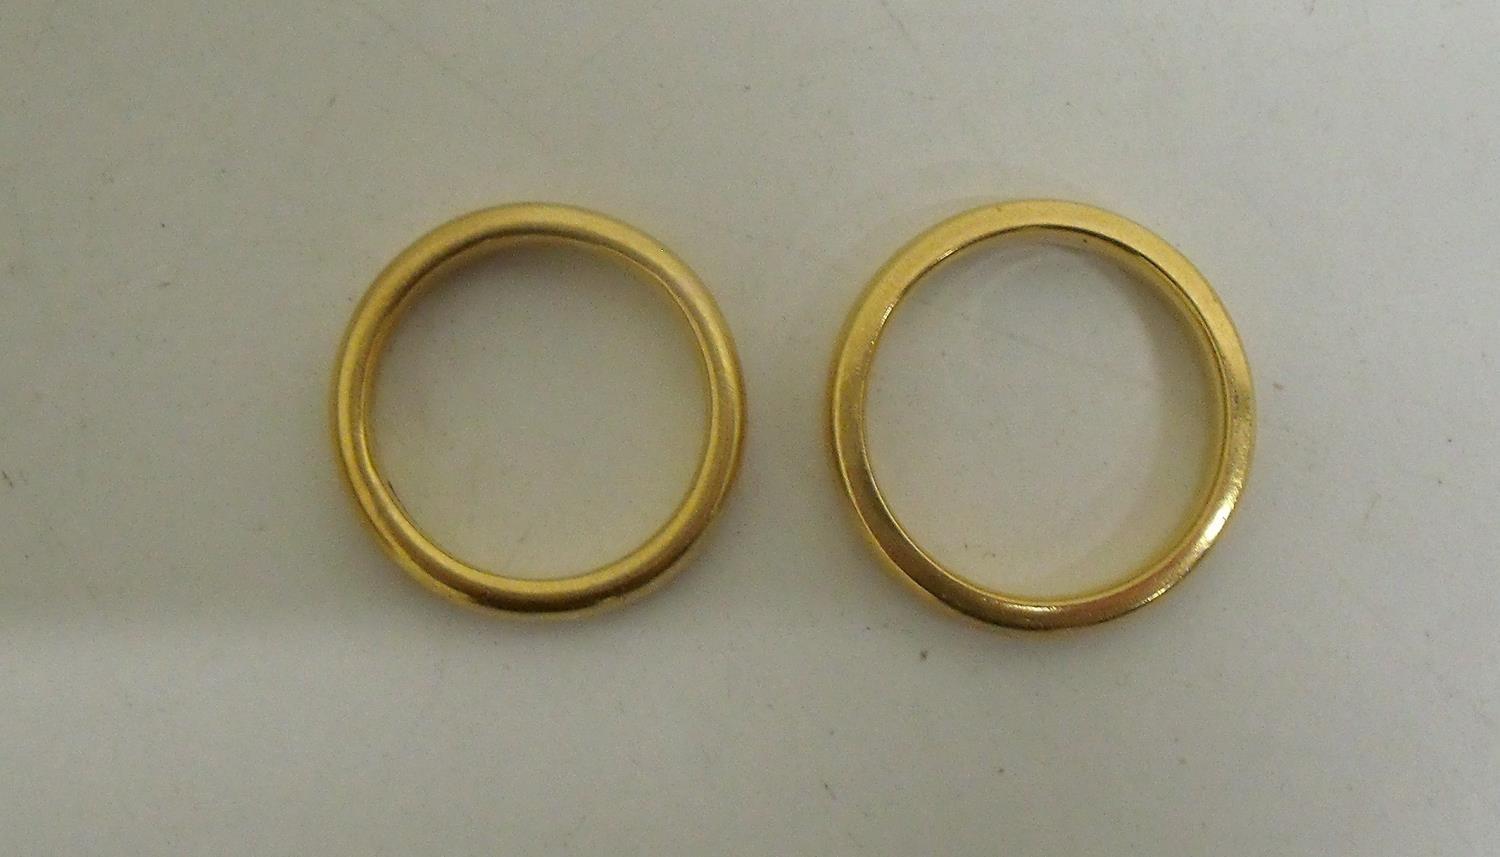 Two 22ct gold wedding bands (12g)